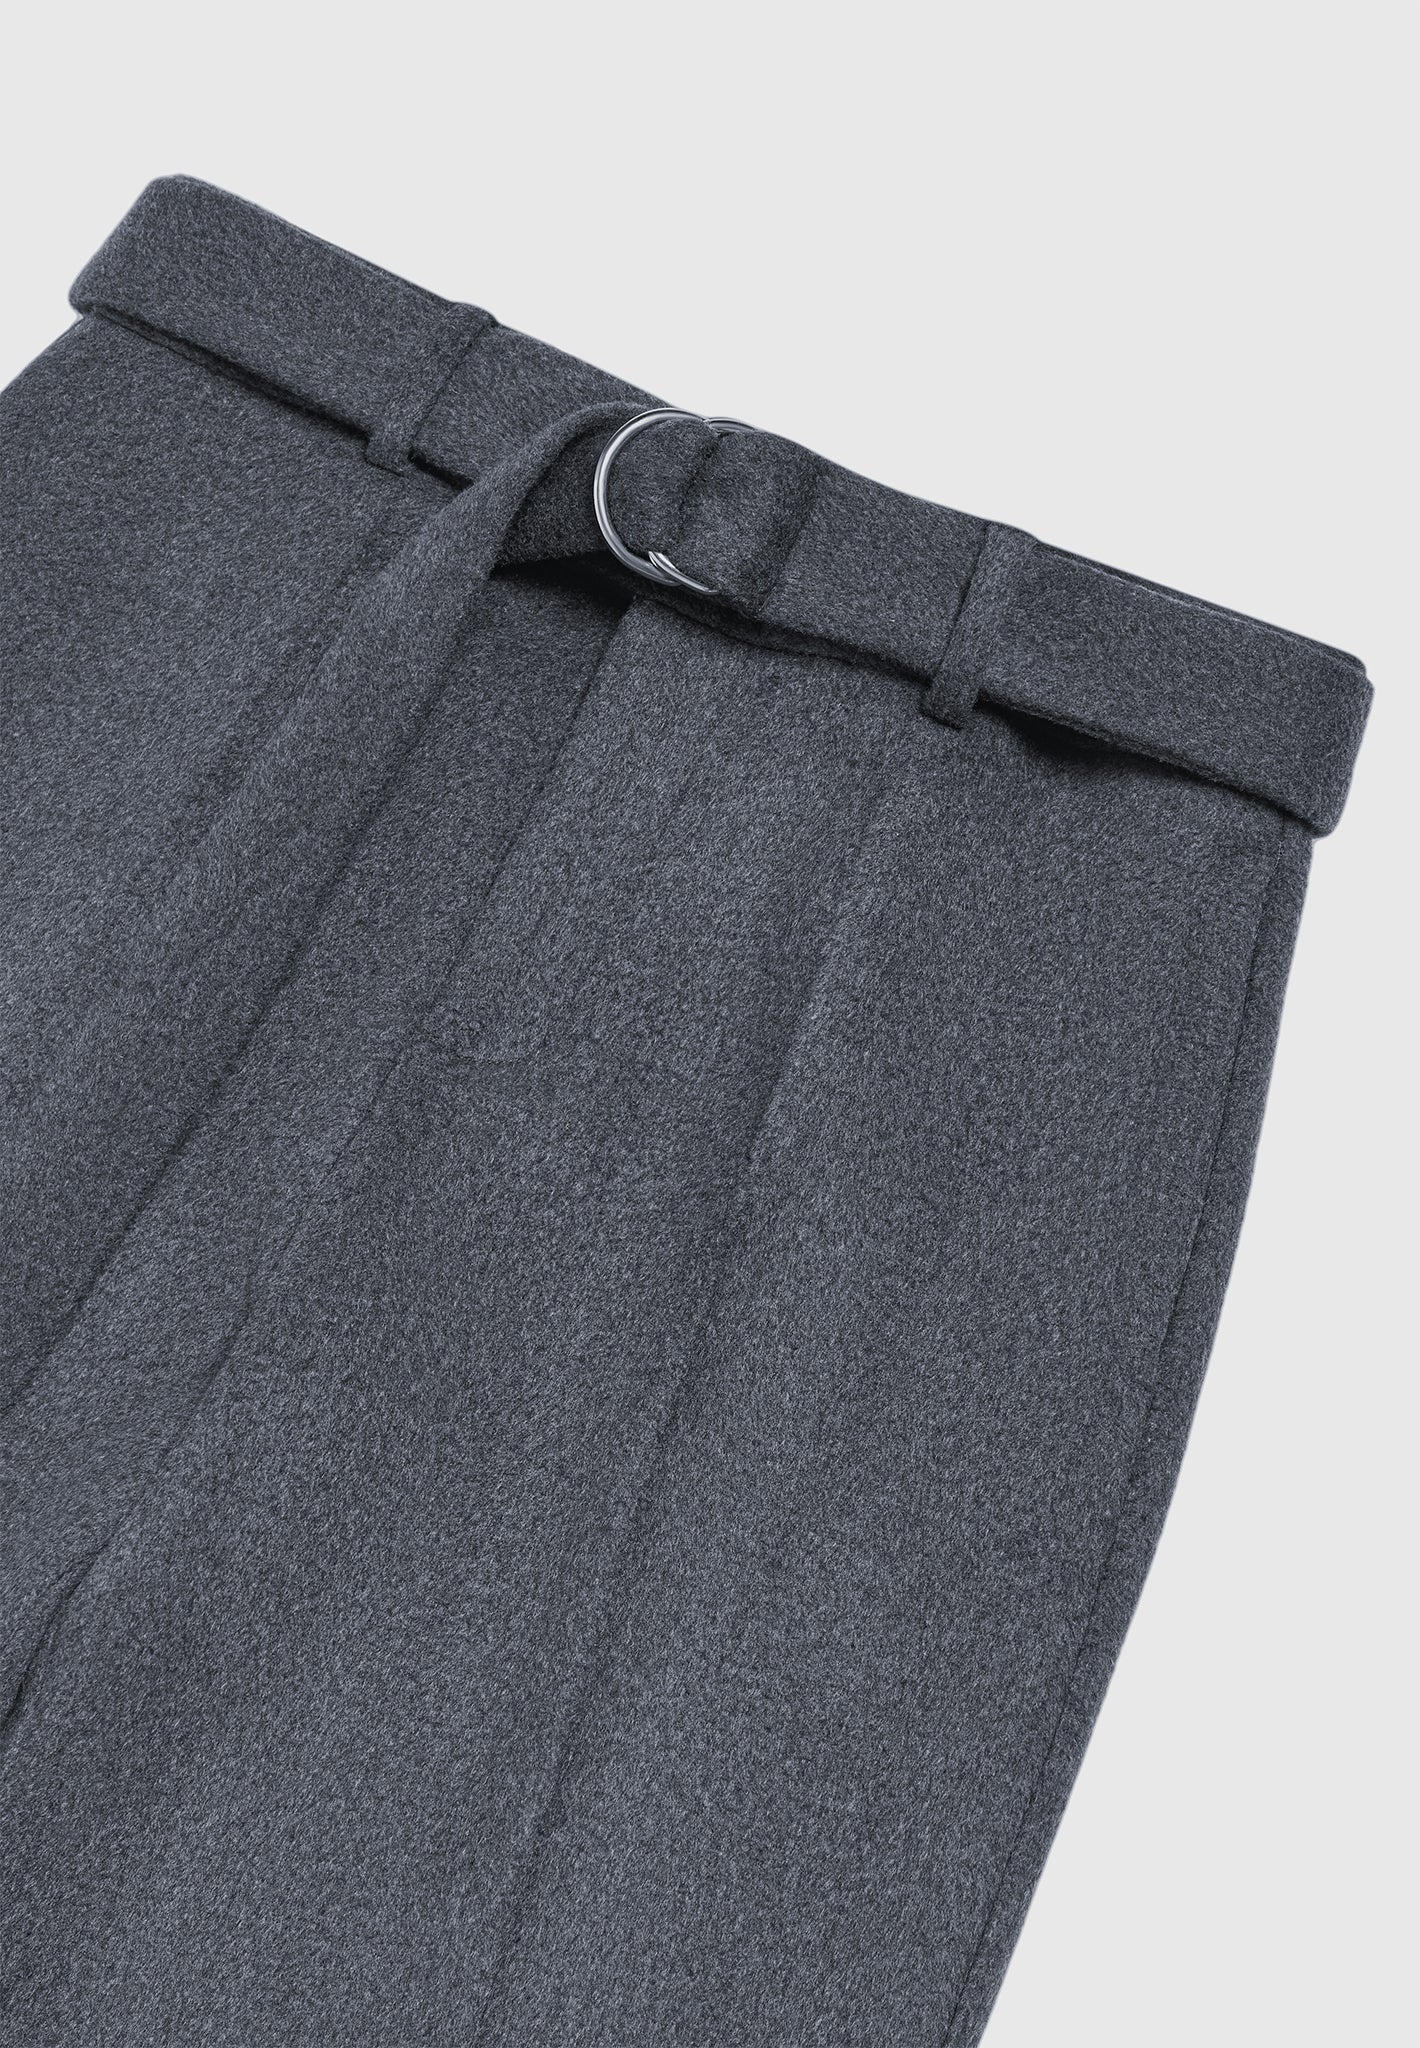 wool-blend-marl-belted-trousers-charcoal-grey